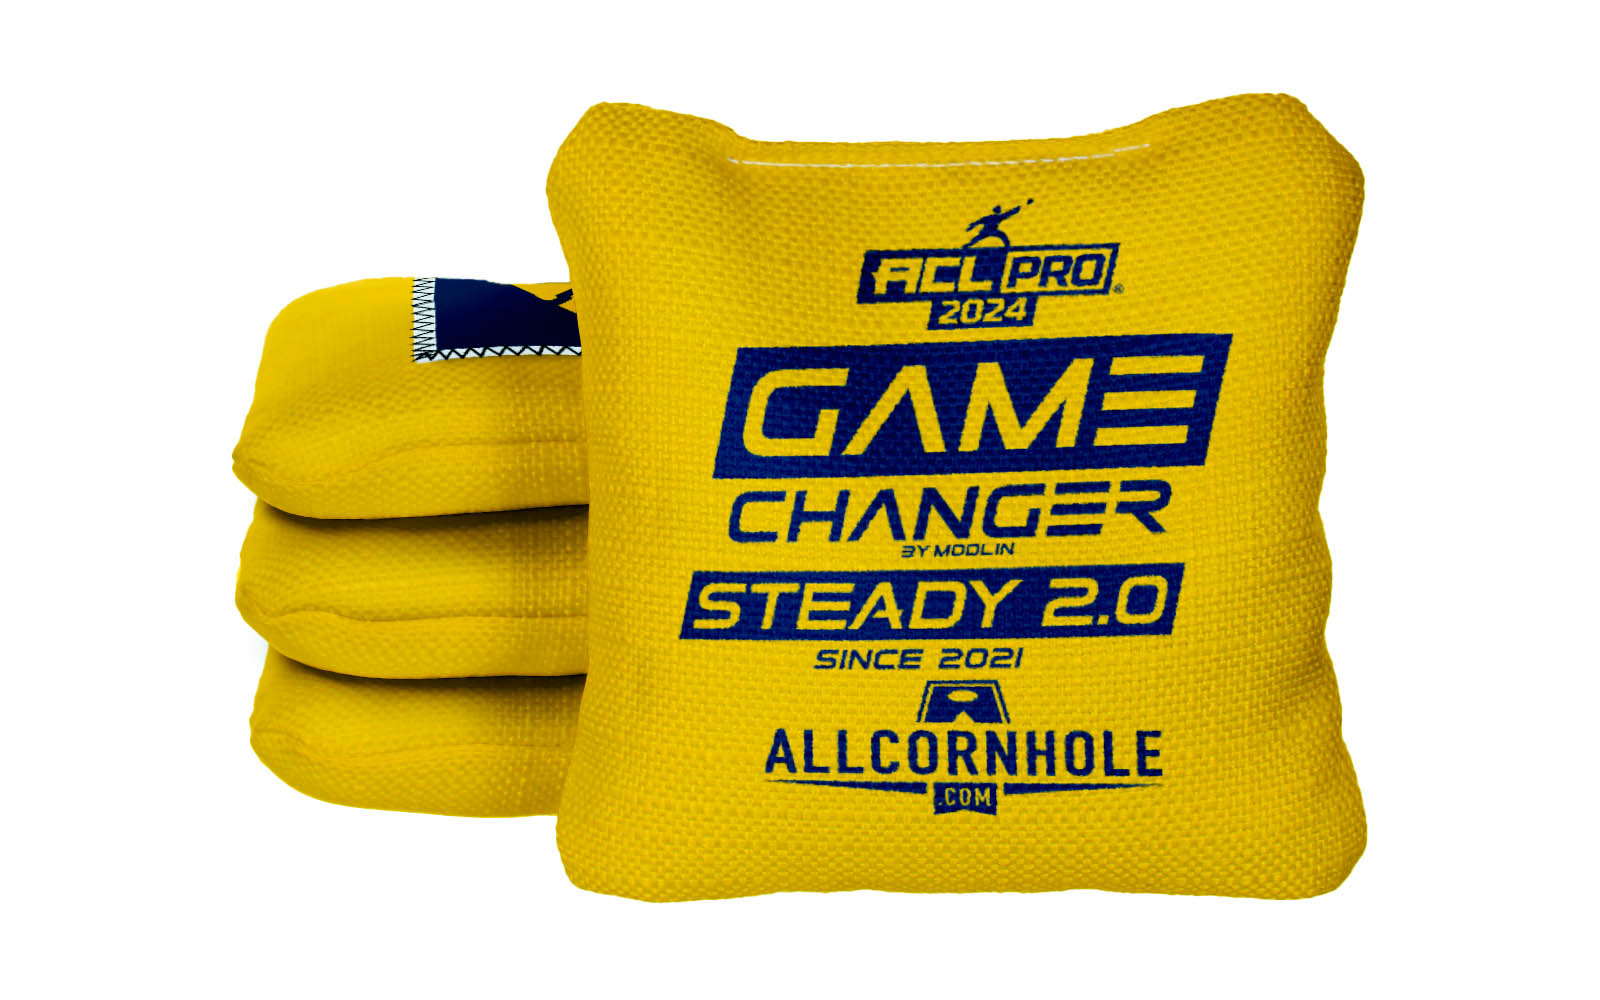 Officially Licensed Collegiate Cornhole Bags - AllCornhole Game Changers Steady 2.0 - Set of 4 - West Virginia University